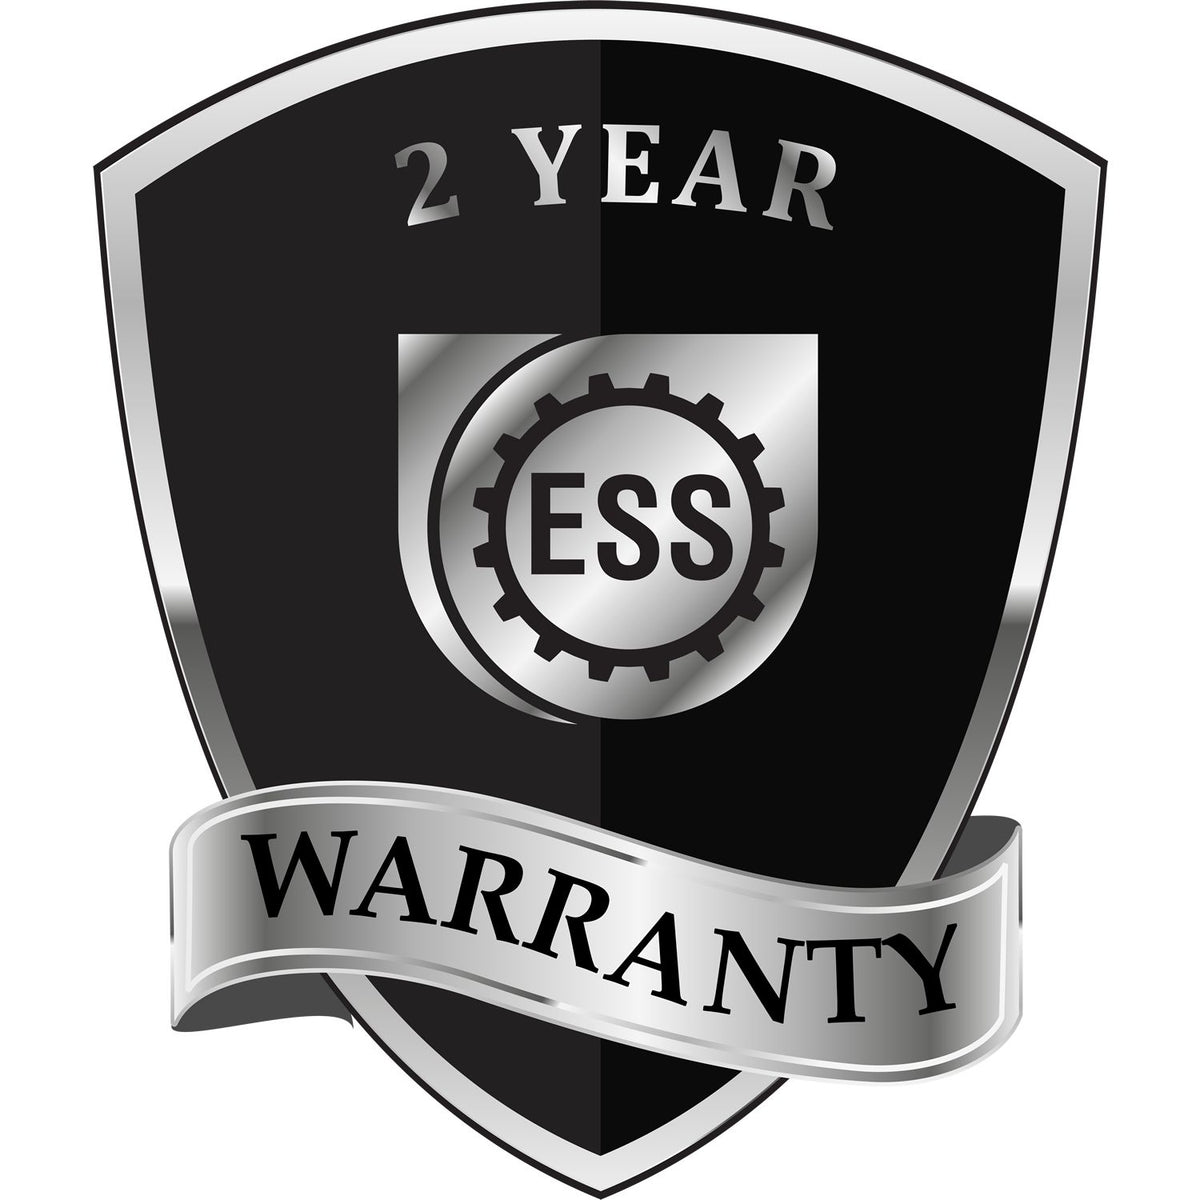 A badge or emblem showing a warranty icon for the Georgia Desk Architect Embossing Seal